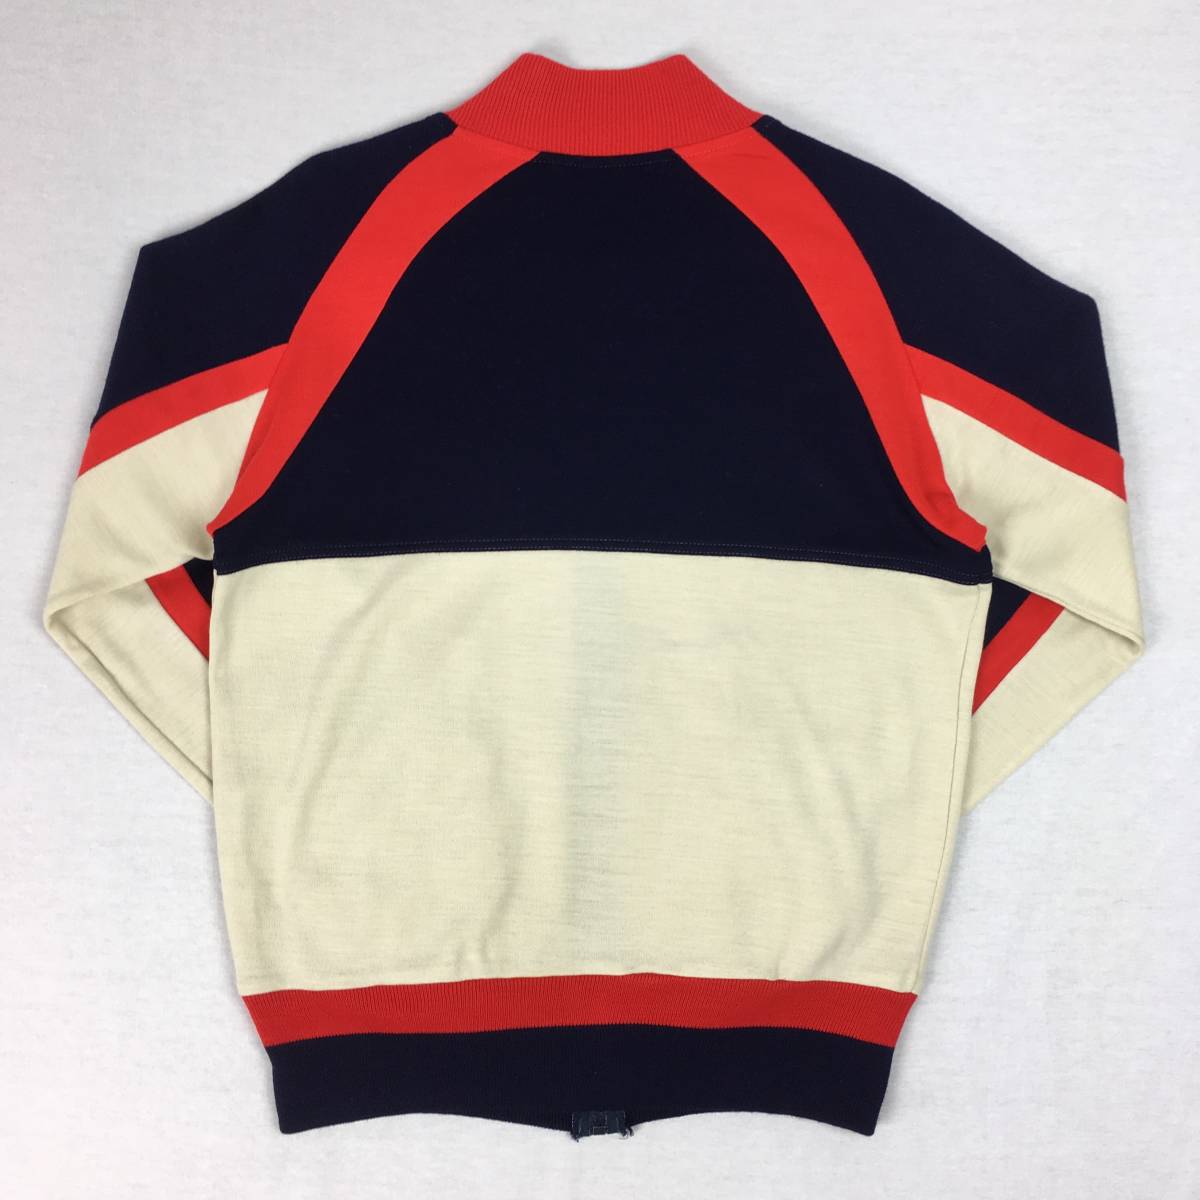 [70s 80s]FILA filler jersey truck top Italy made navy / ivory / red 